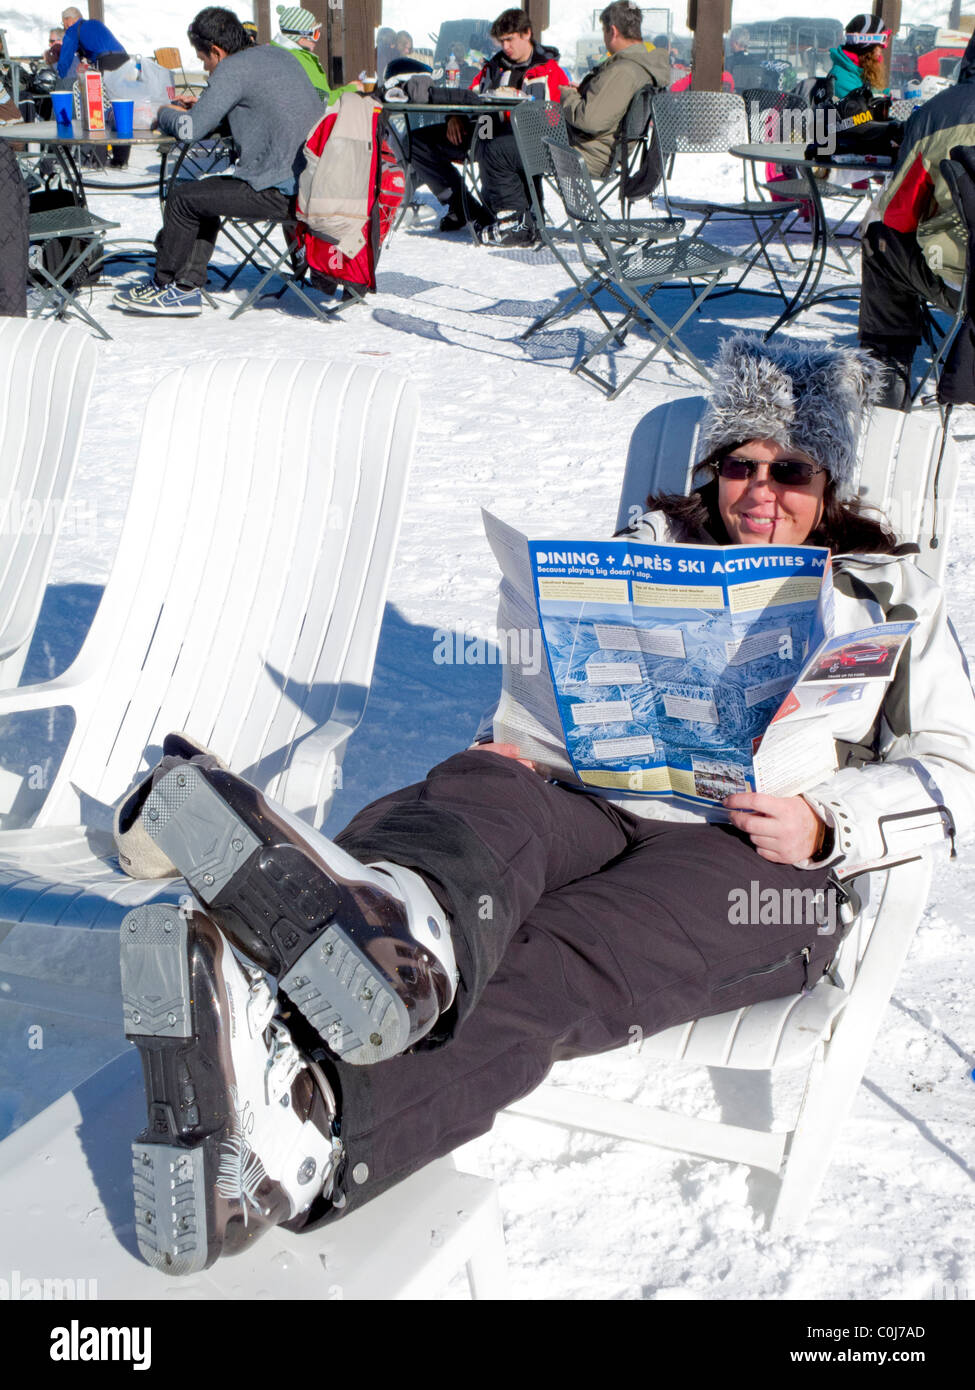 Skier reads her ski trail map and relaxes on a beach chair onslop at Mammoth Mountain ski resort, California, USA Stock Photo